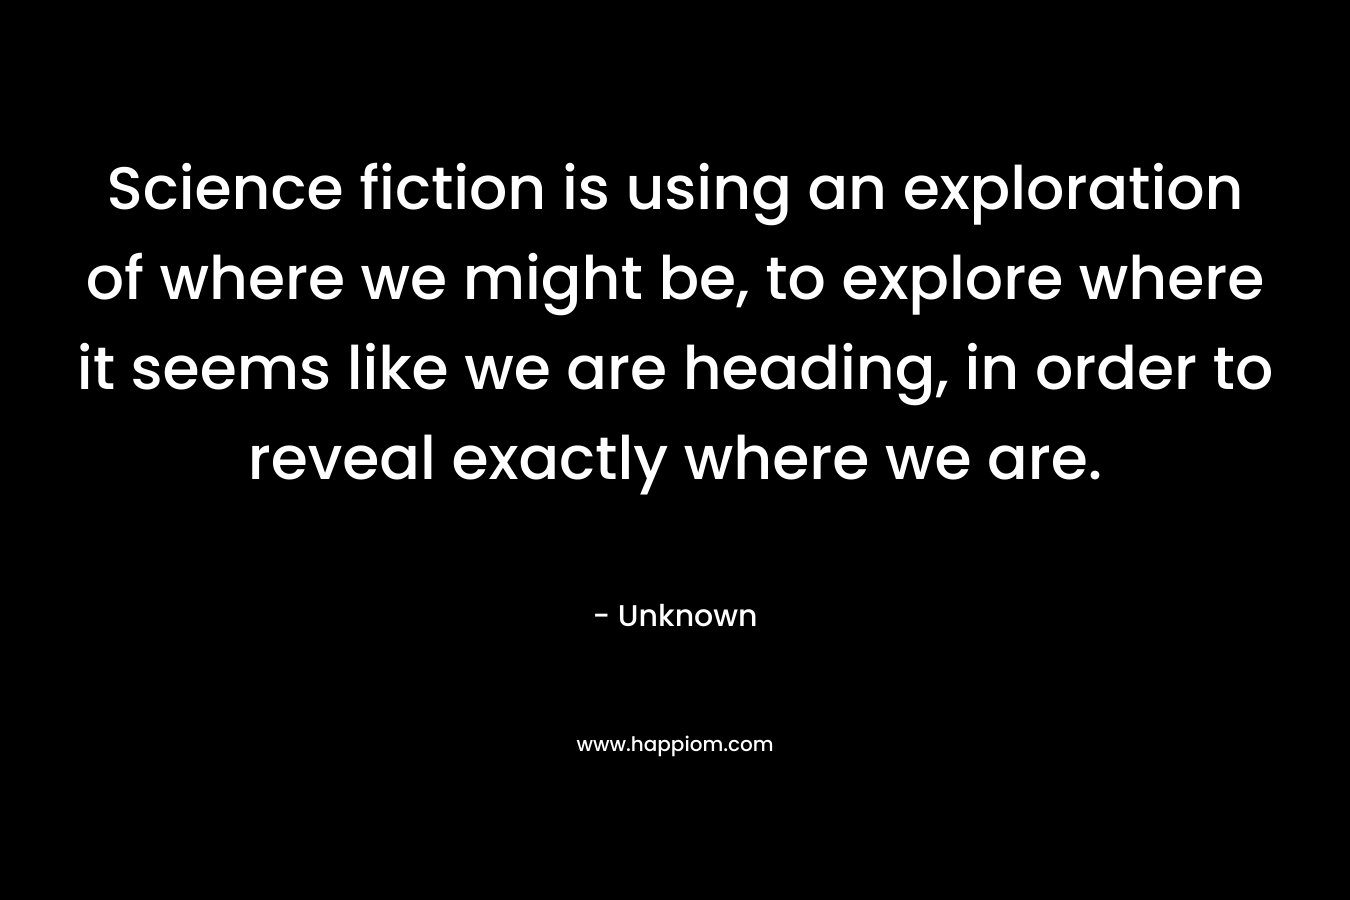 Science fiction is using an exploration of where we might be, to explore where it seems like we are heading, in order to reveal exactly where we are.